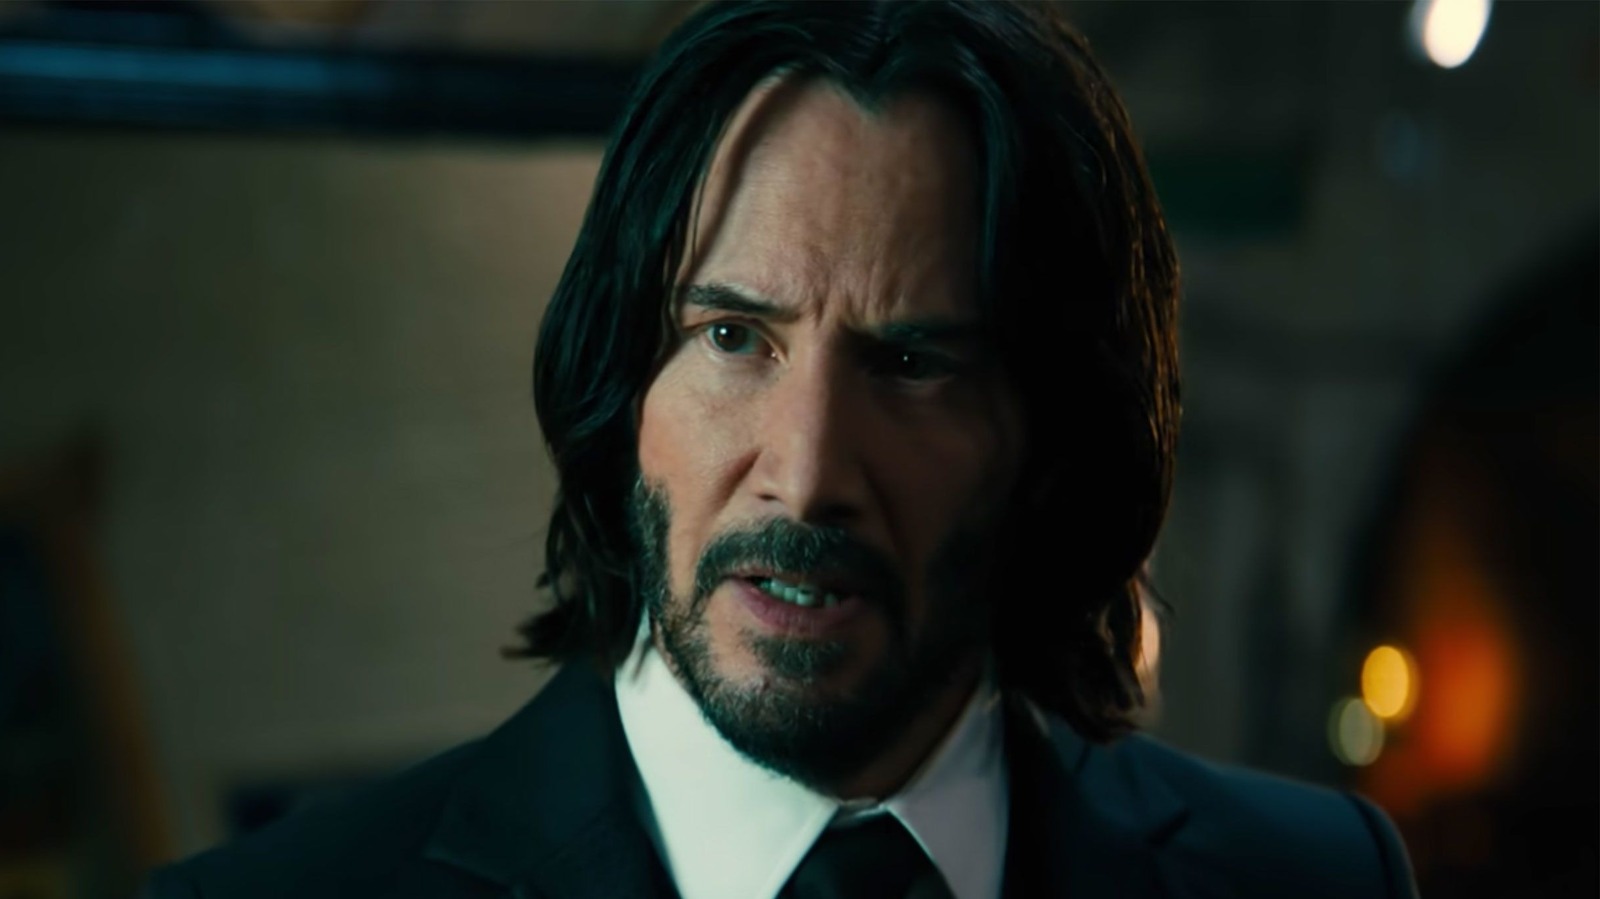 John Wick 4's post-credits scene proves the action never really